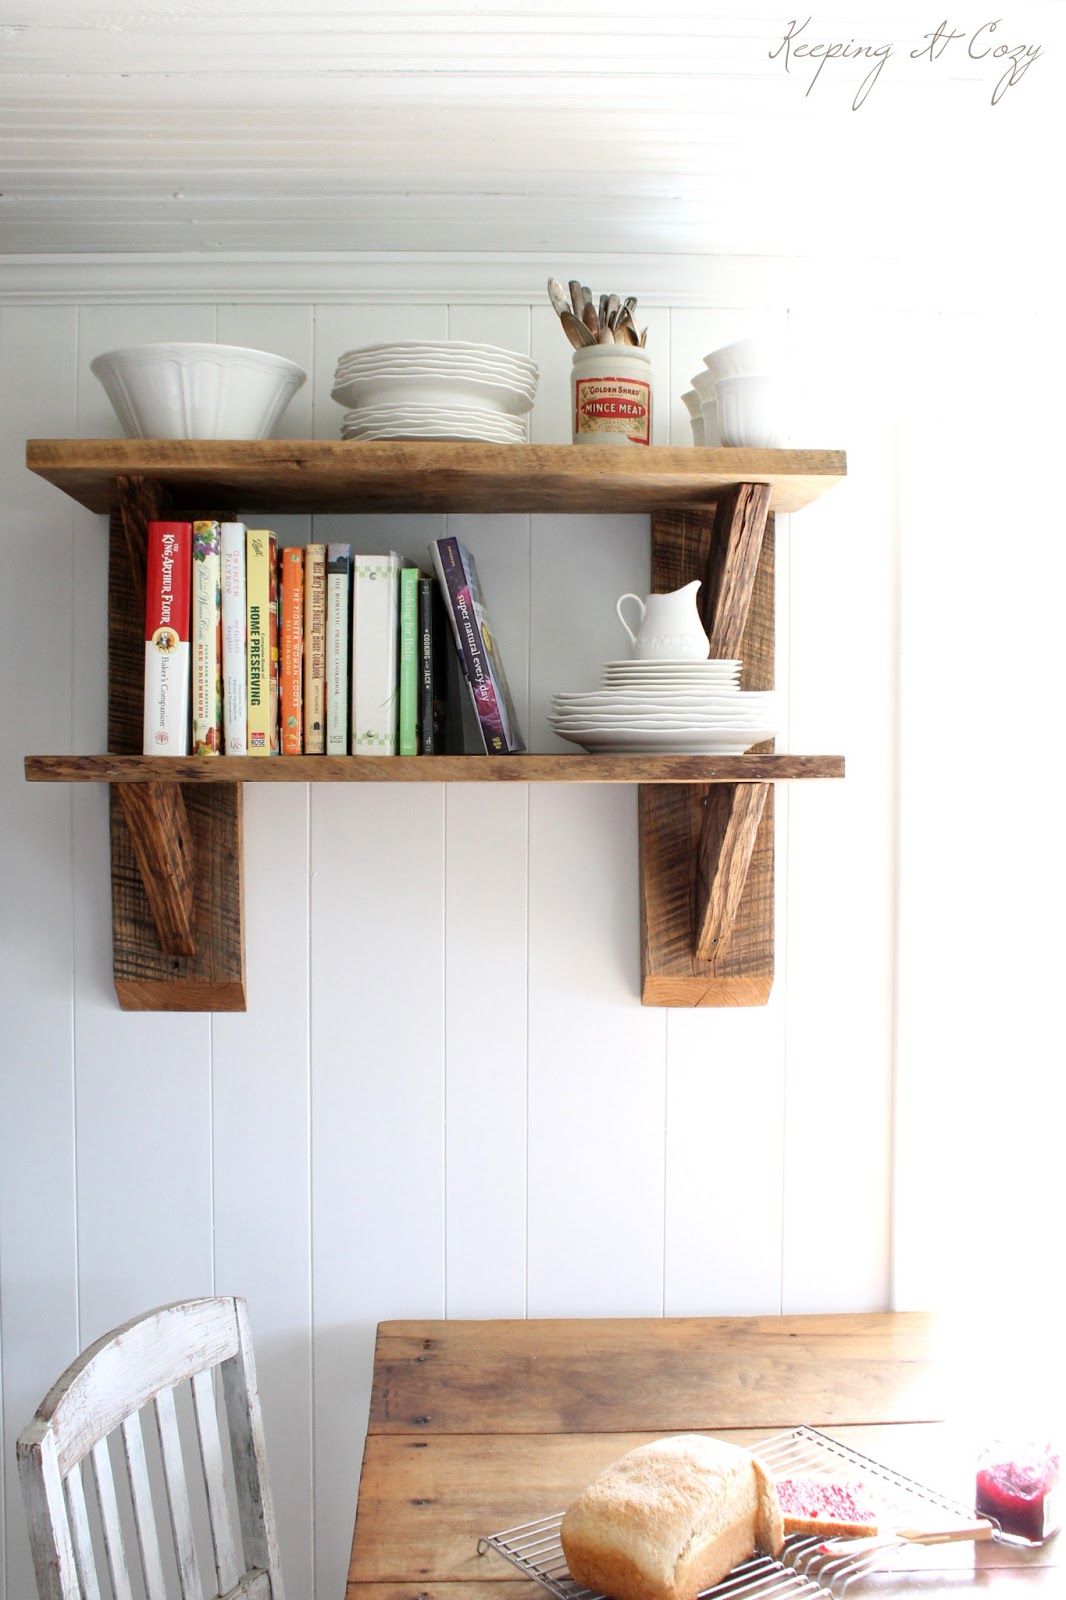 Rustic shelves made from reclaimed wood